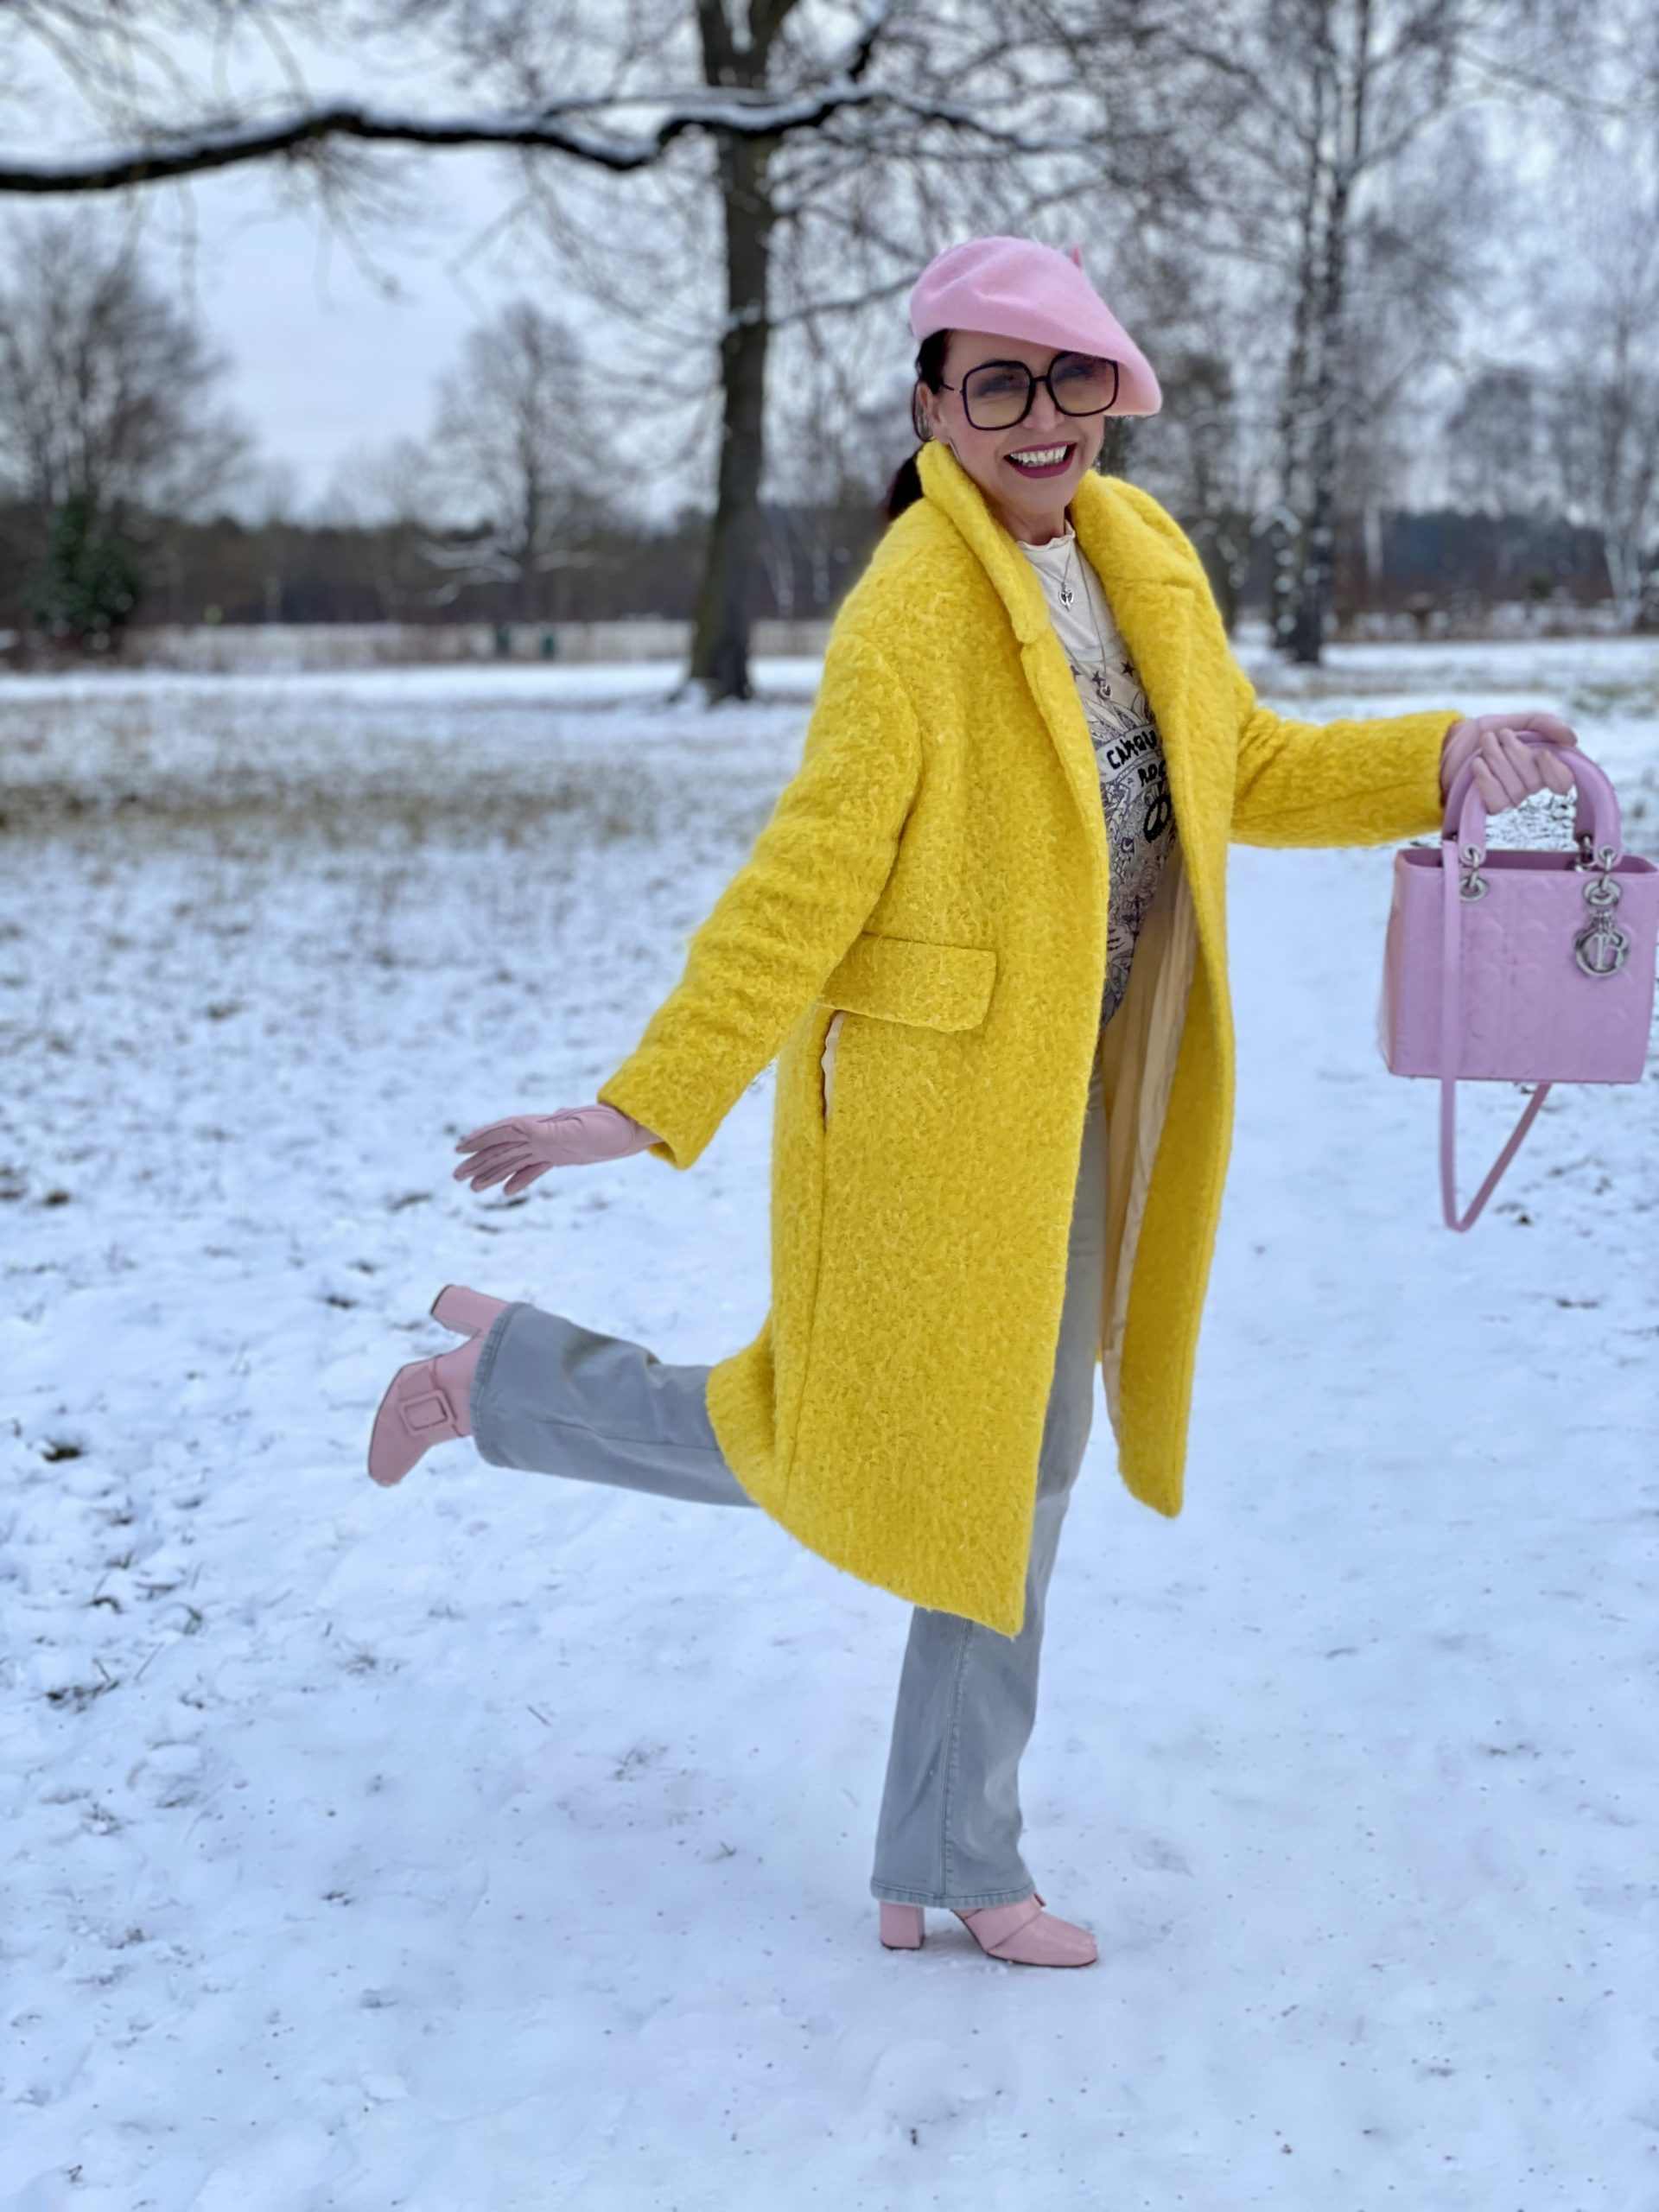 Pink and Yellow, Pink bag Dior, Pink Beret Benetton, Shades Dior, Yellow coat Mango, Jeans 7 for all Mankind, Shoes Asos, style for ladies, winteroutfit, streetstyle, mystyle, over50, agiles fashion, ageless style, timeless, winter special, colors, Fashionblog Augsburg, cochastyle